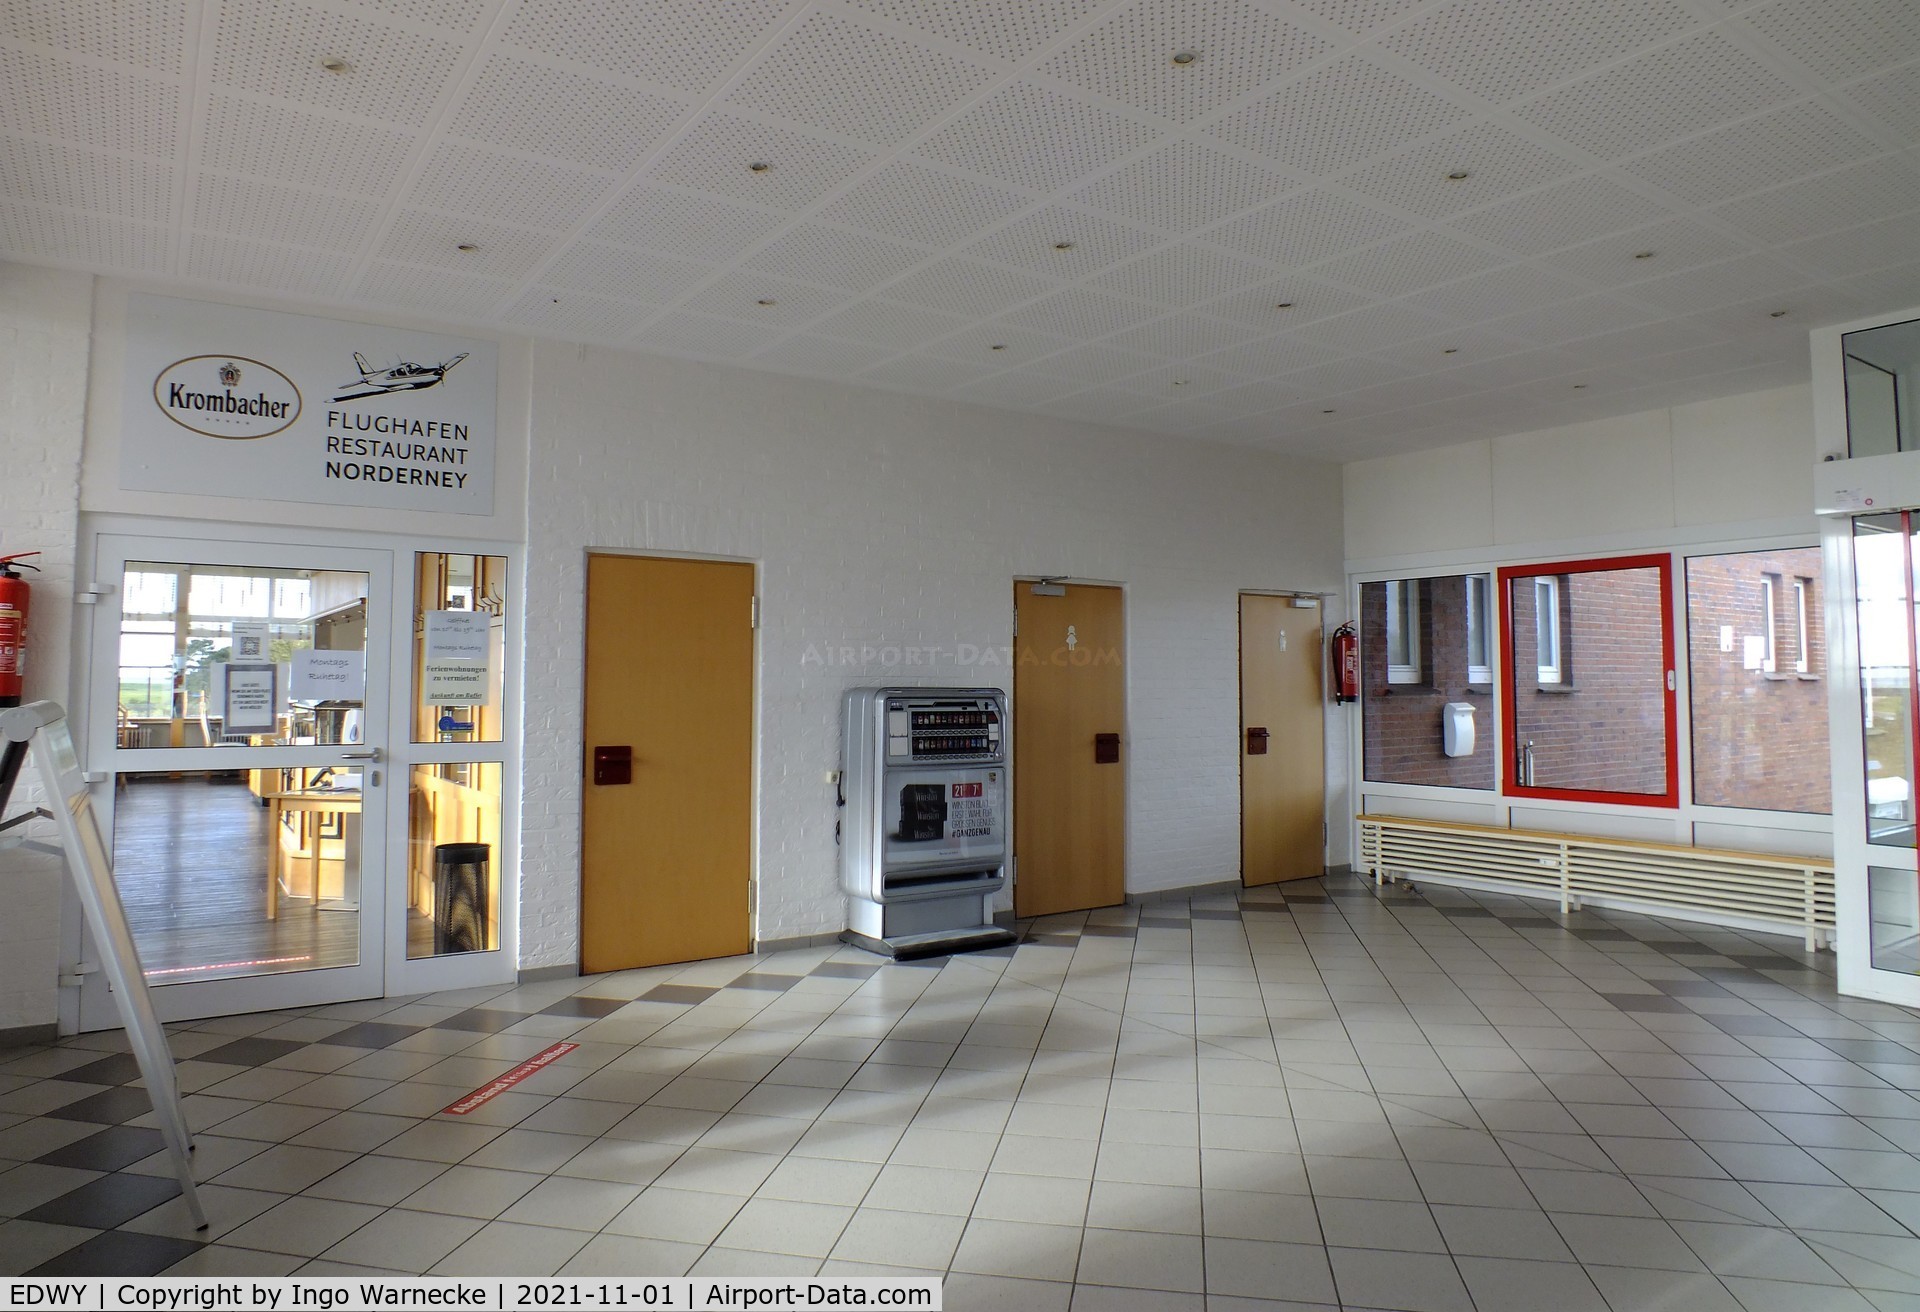 Norderney Airport, Norderney Germany (EDWY) - inside the terminal at Norderney airfield